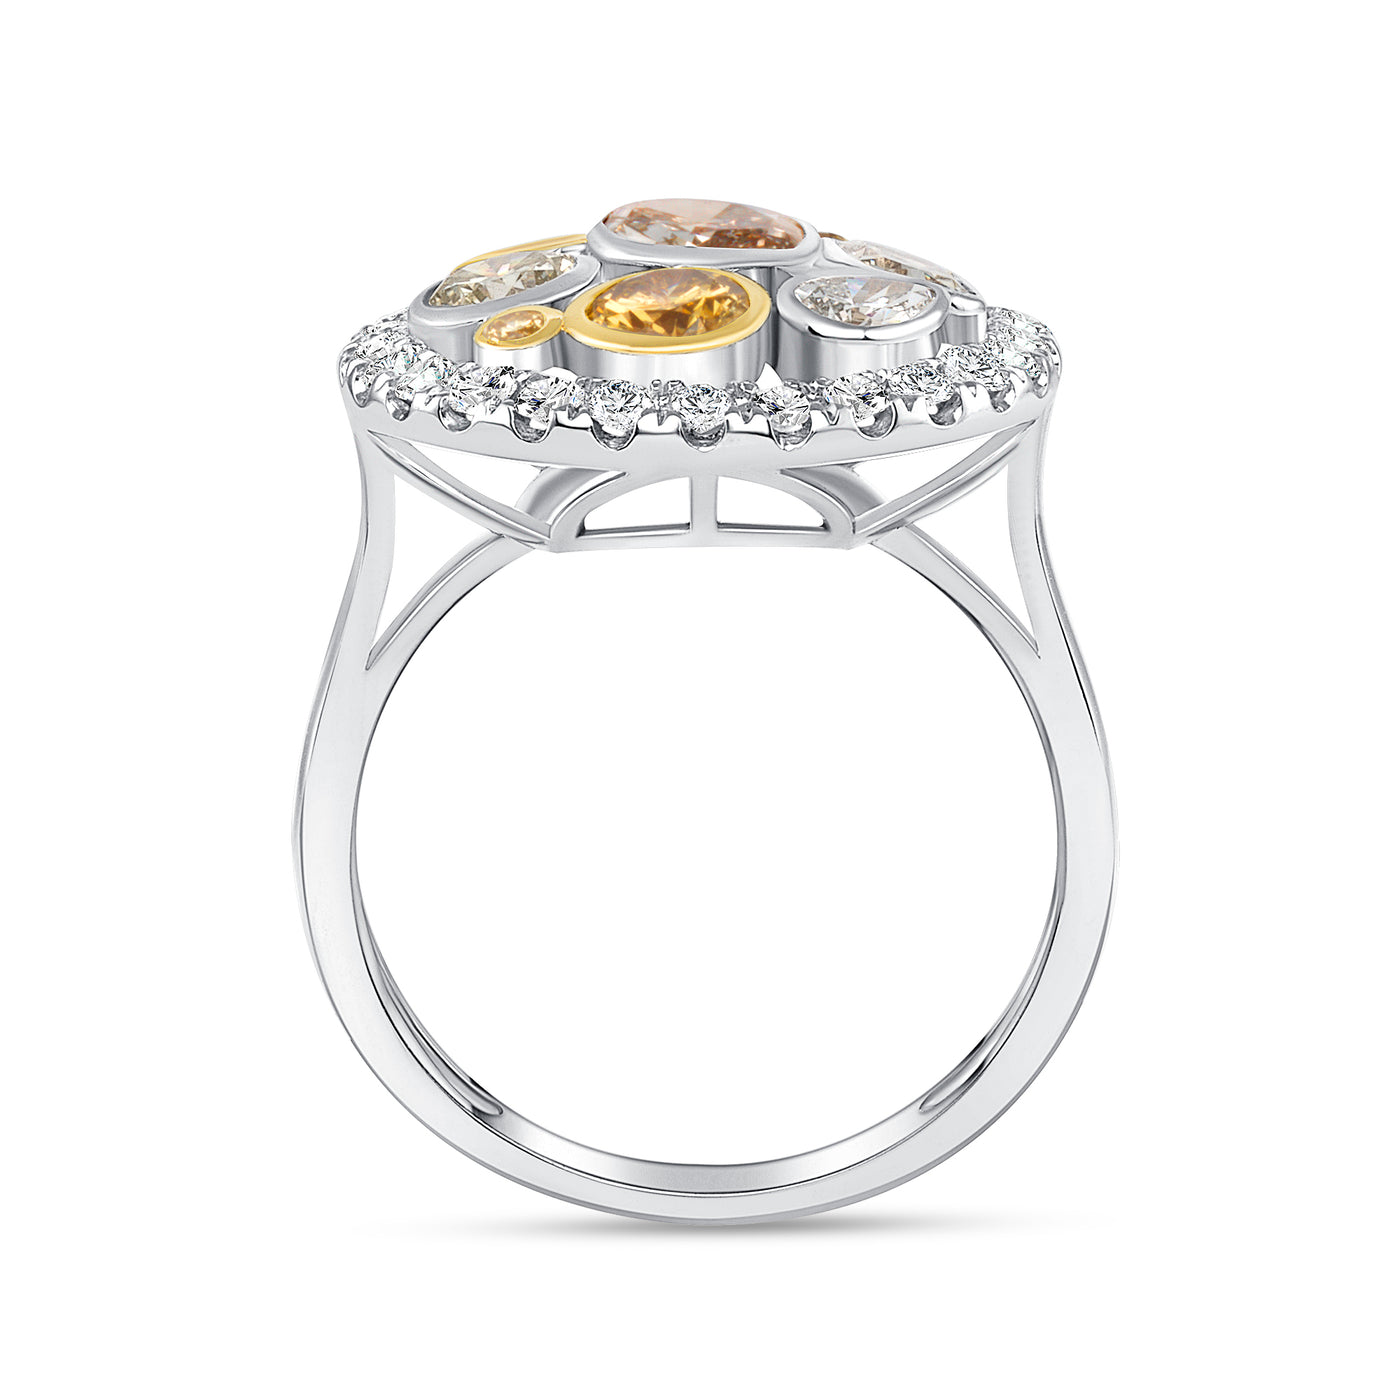 1.82 Carat Natural Yellow and Brown Diamond in 14K Gold